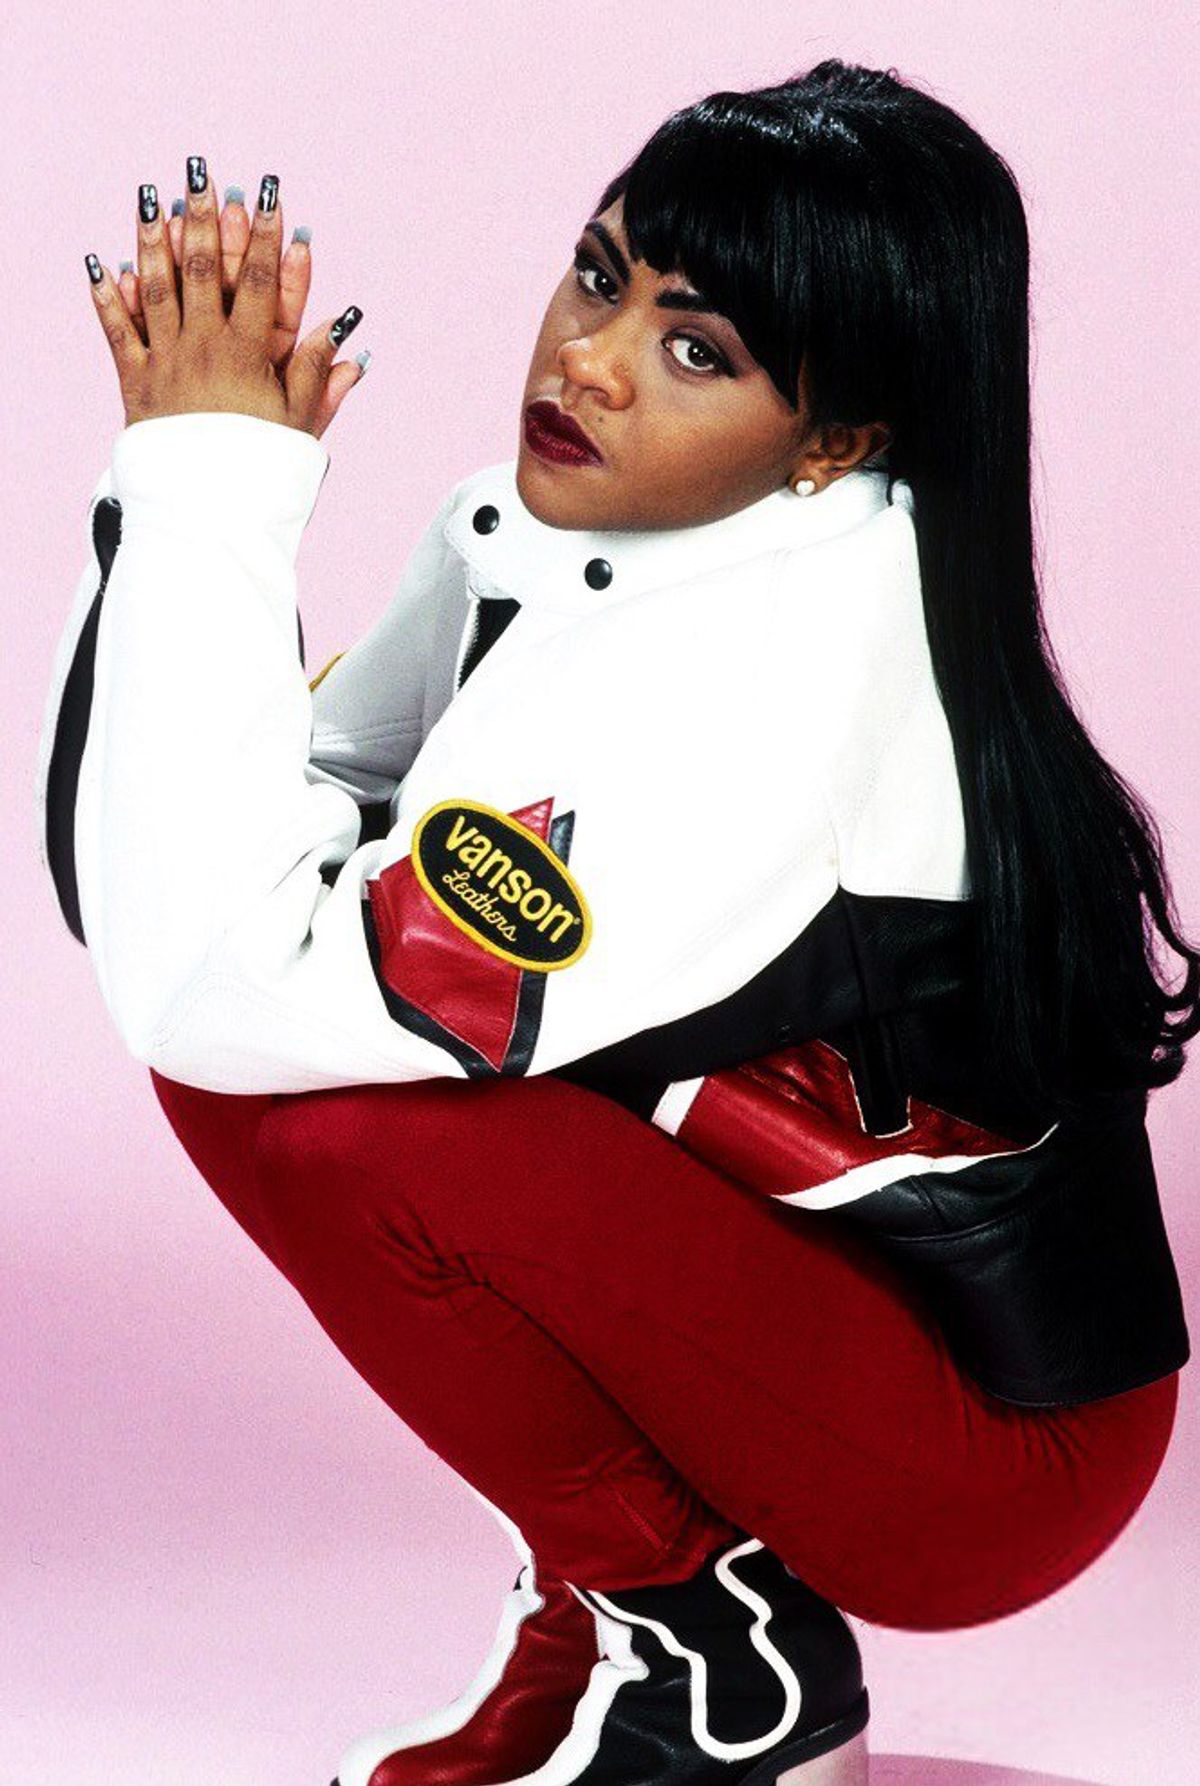 What Happened To Lil Kim?